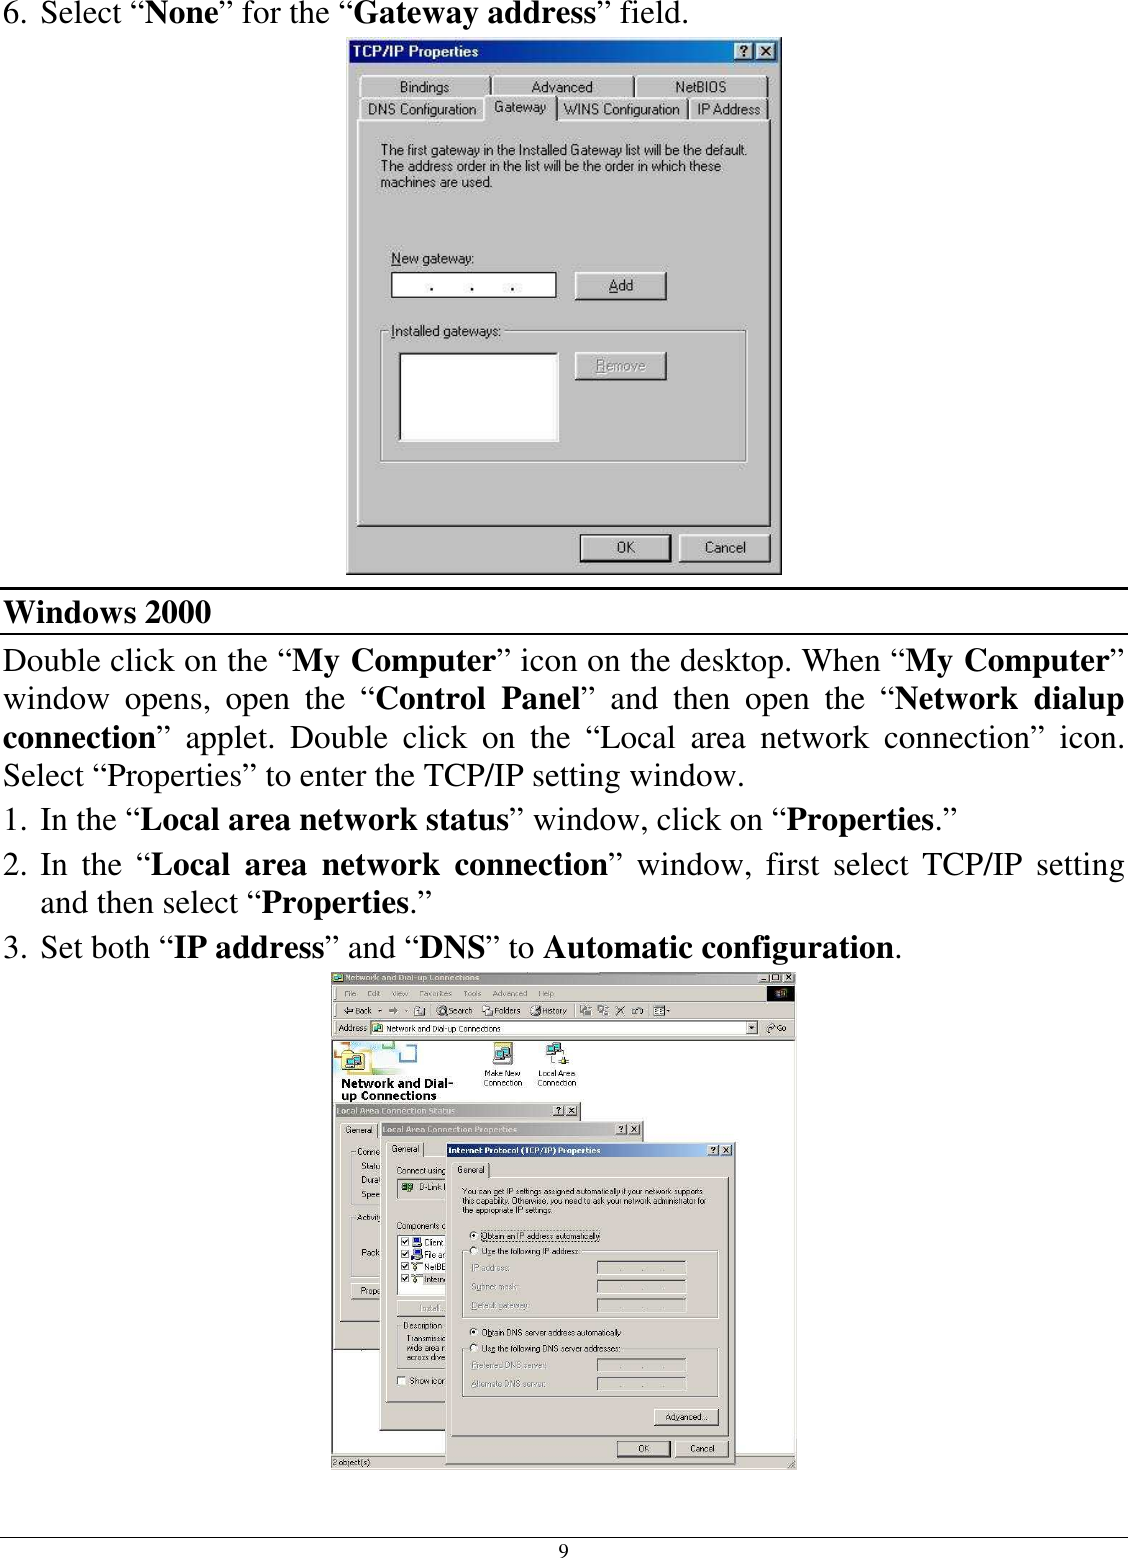 9 6. Select “None” for the “Gateway address” field.  Windows 2000 Double click on the “My Computer” icon on the desktop. When “My Computer” window  opens,  open  the  “Control  Panel”  and  then  open  the  “Network  dialup connection”  applet.  Double  click  on  the  “Local  area  network  connection”  icon. Select “Properties” to enter the TCP/IP setting window. 1. In the “Local area network status” window, click on “Properties.” 2. In  the  “Local  area  network  connection”  window,  first  select  TCP/IP  setting and then select “Properties.” 3. Set both “IP address” and “DNS” to Automatic configuration.  